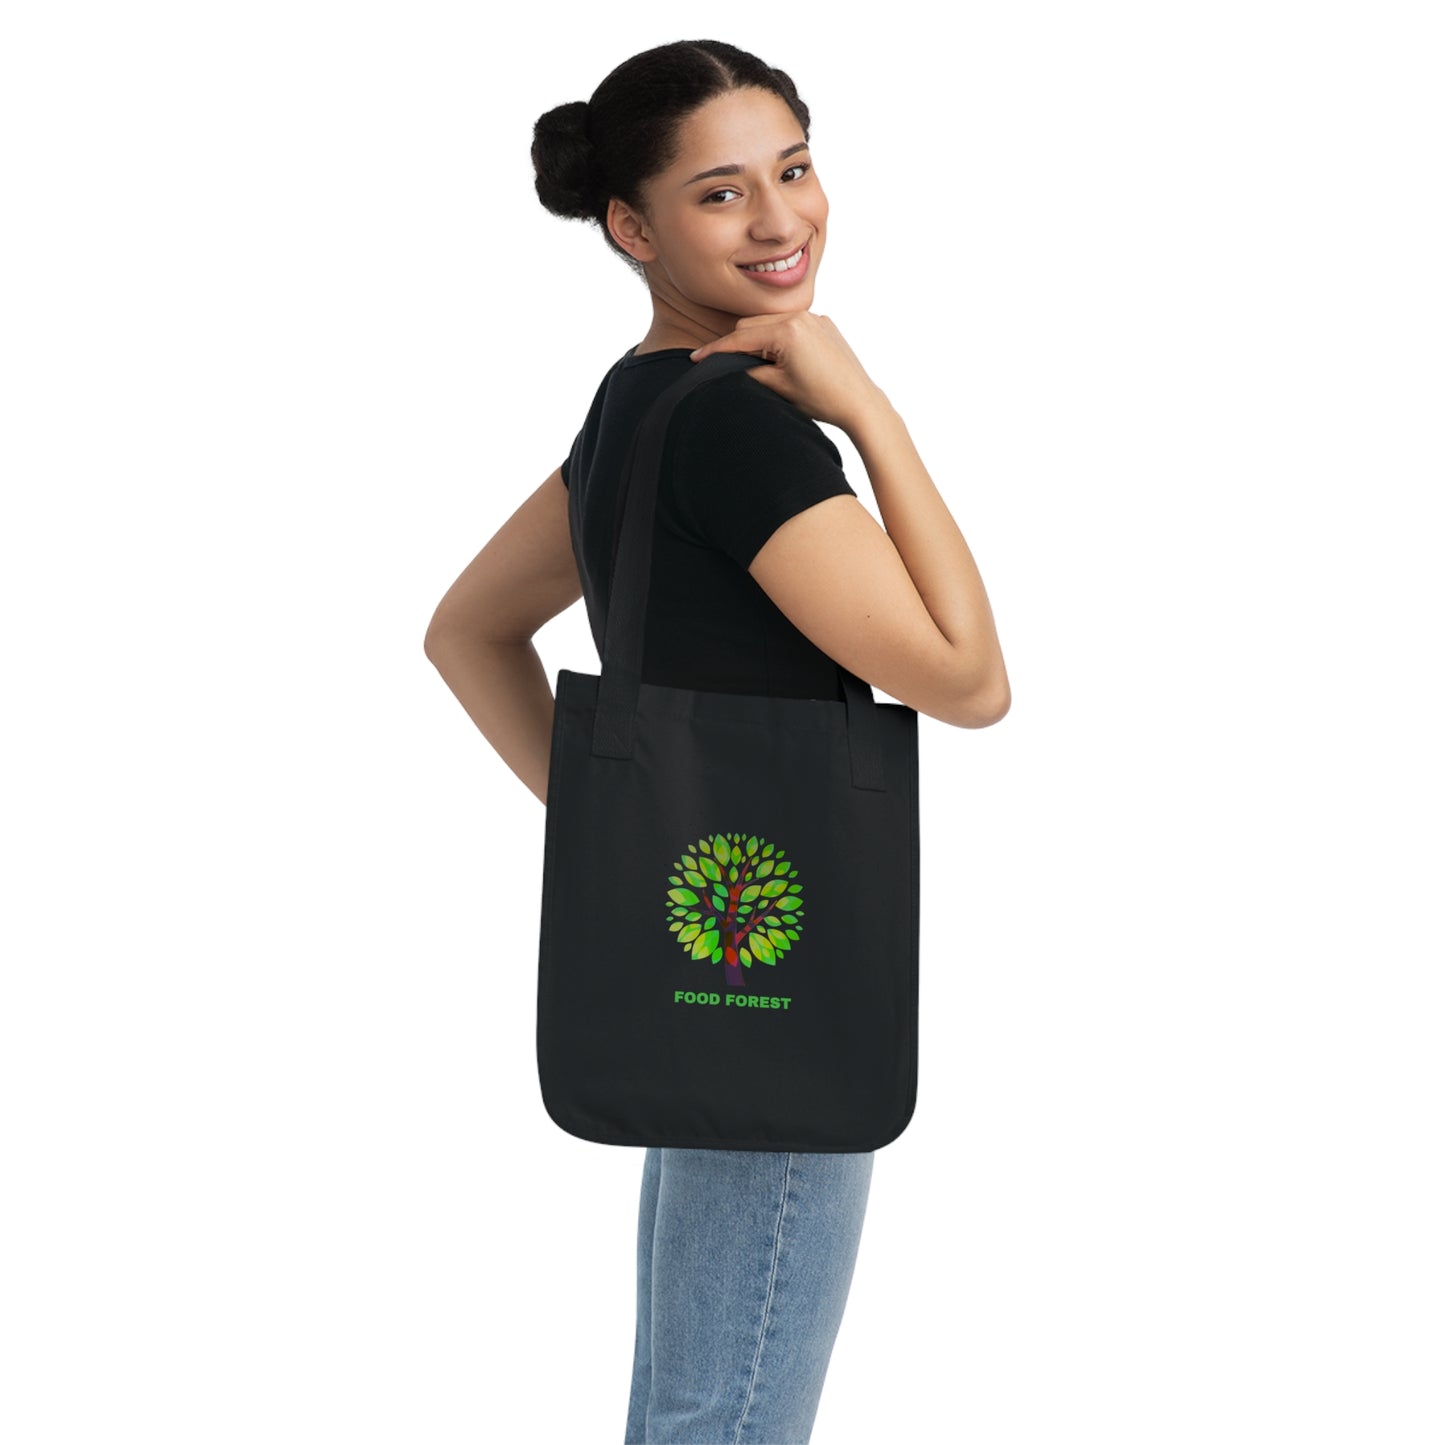 FOOD FOREST Organic Canvas Tote Bag